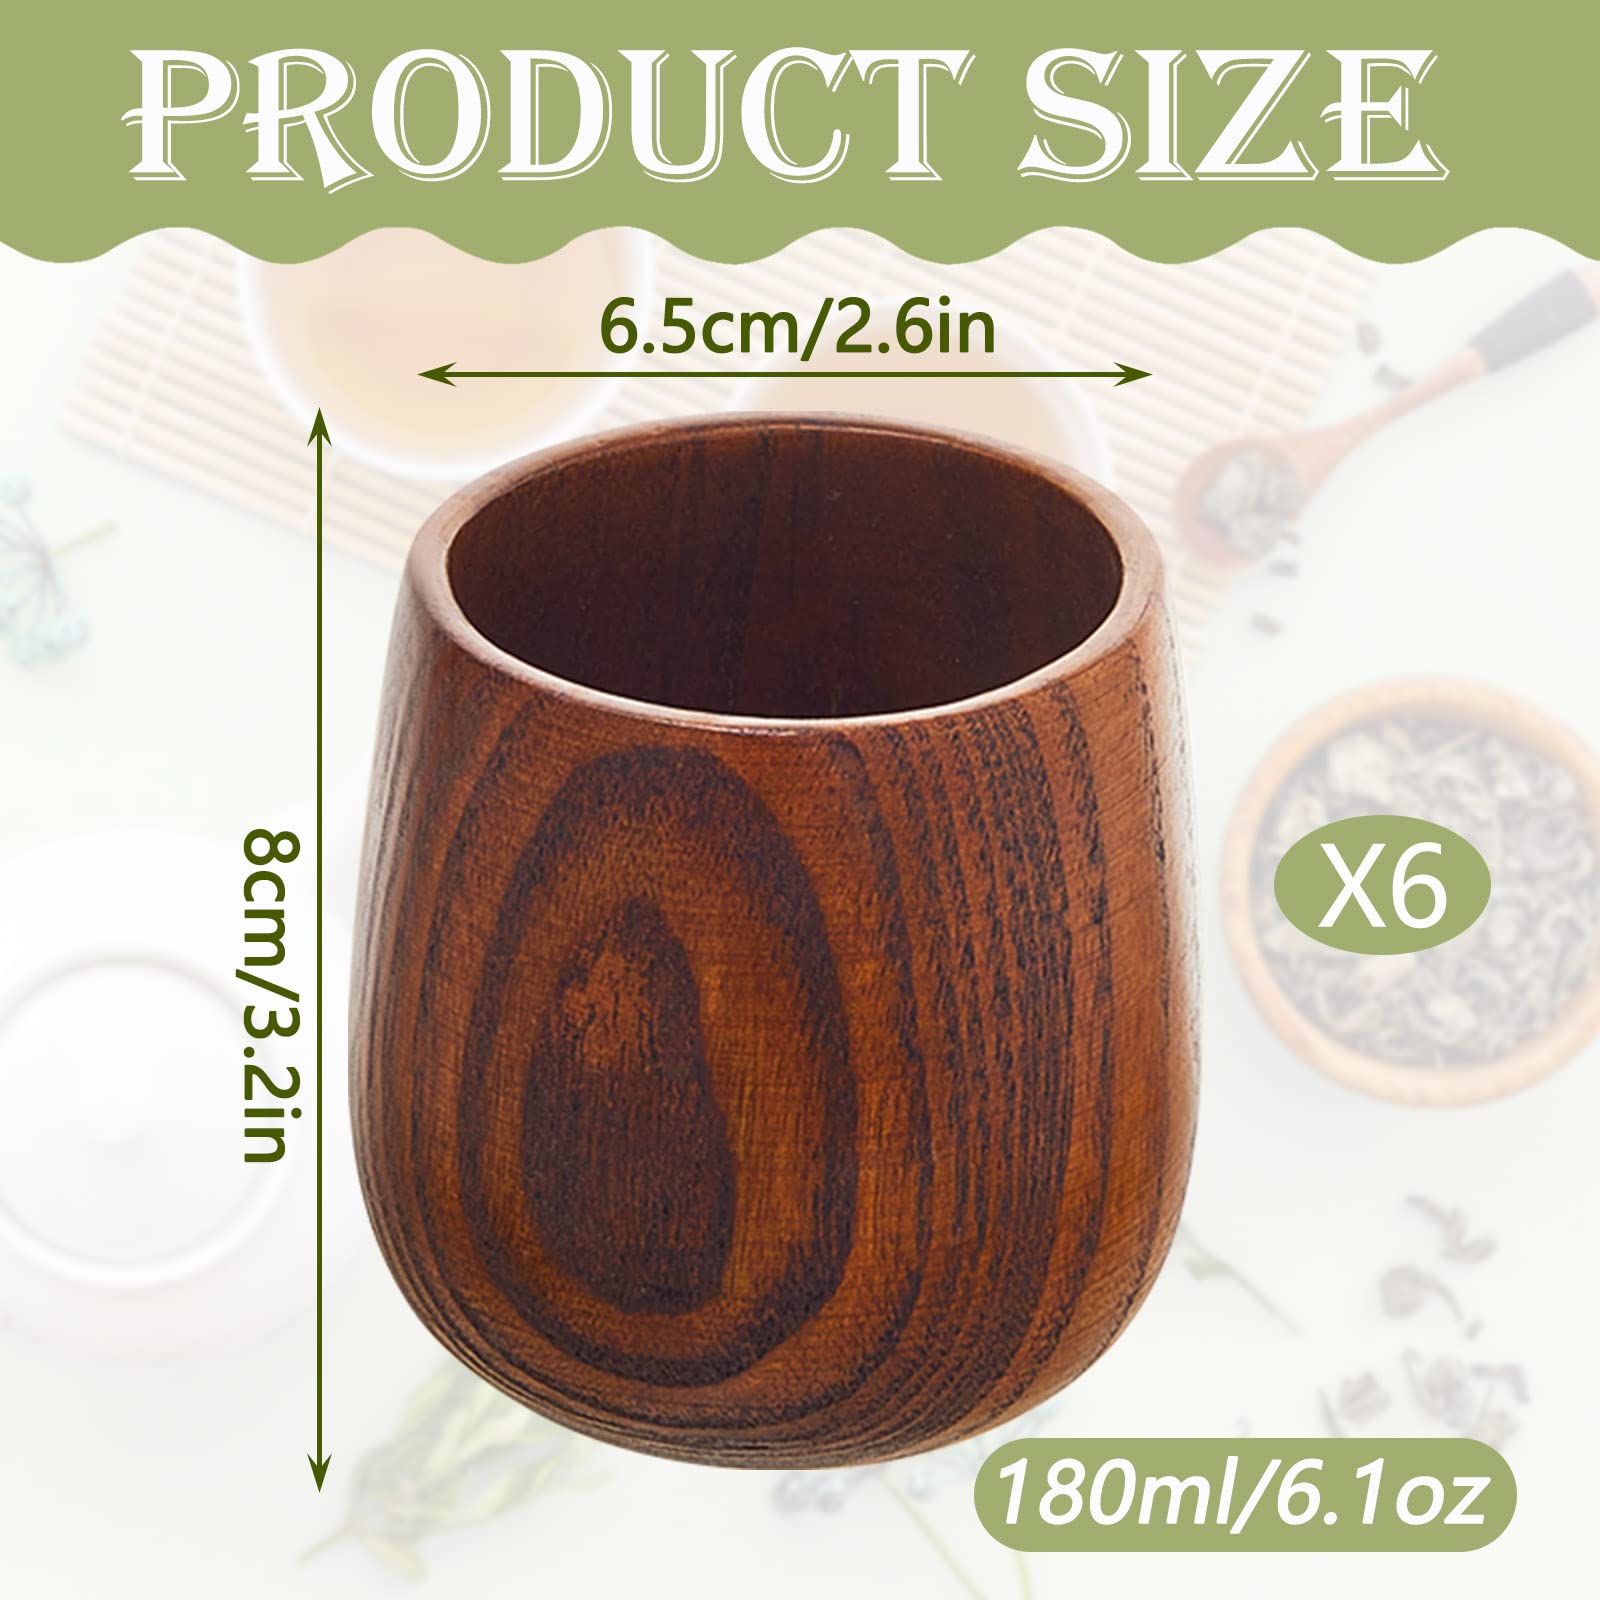 Suclain 6 Pieces 6 oz Wooden Tea Cups Wooden Coffee Cups Wood Teacups Coffee Mug for Drinking Espresso Tea Beer Wine Water Restaurant Cafe Home Serving Entertain, Cannot Use Dishwasher